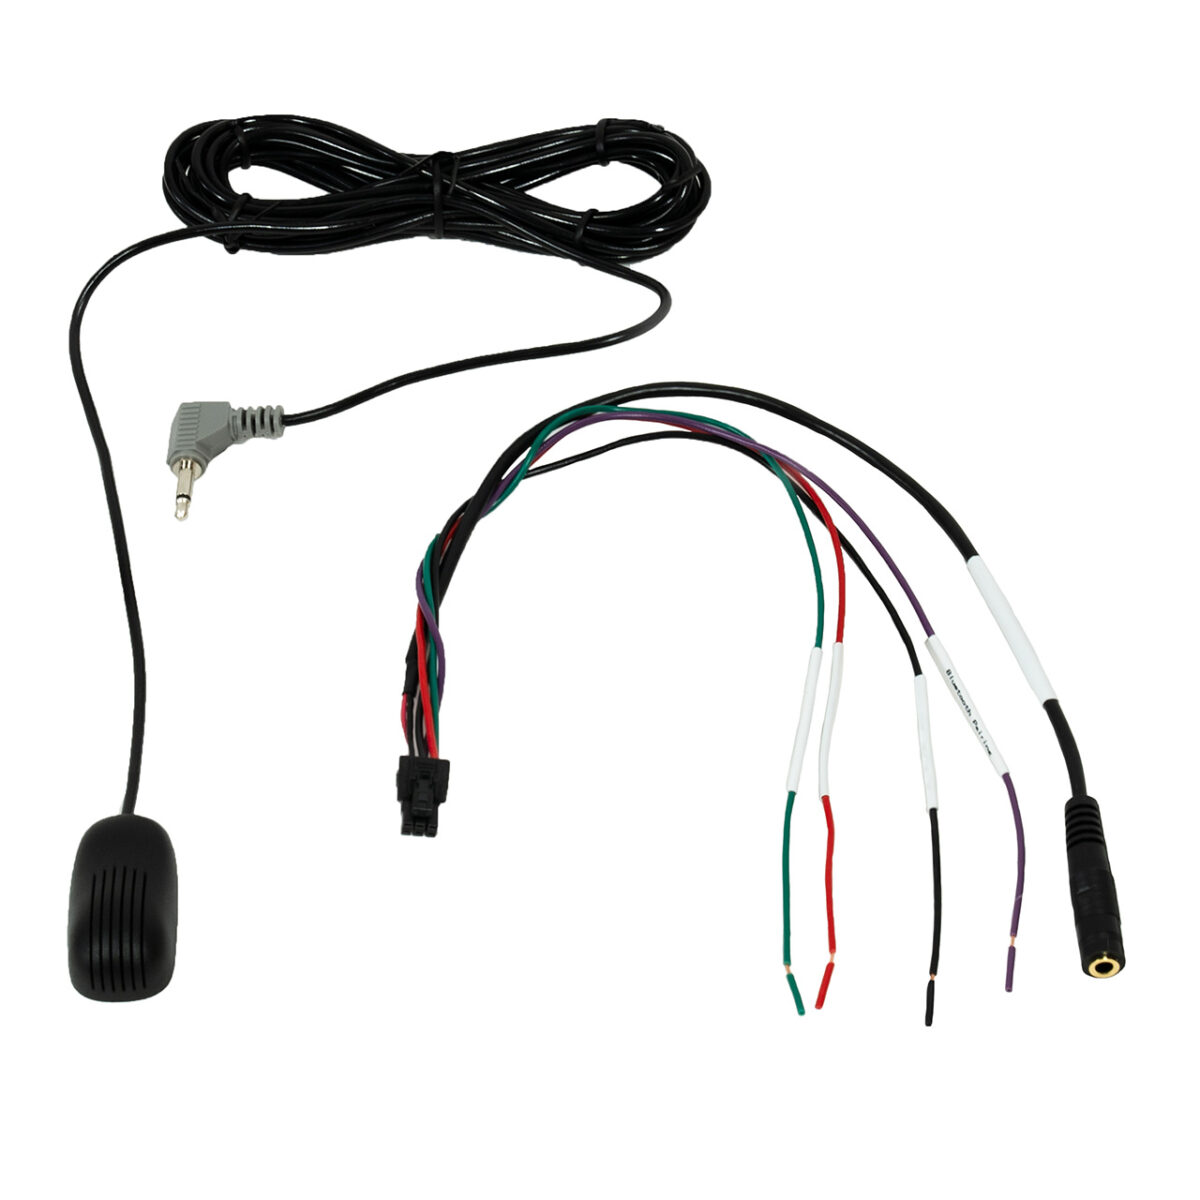 Helix BT Streamer Microphone Kit for bluetooth calling aftermarket sound system